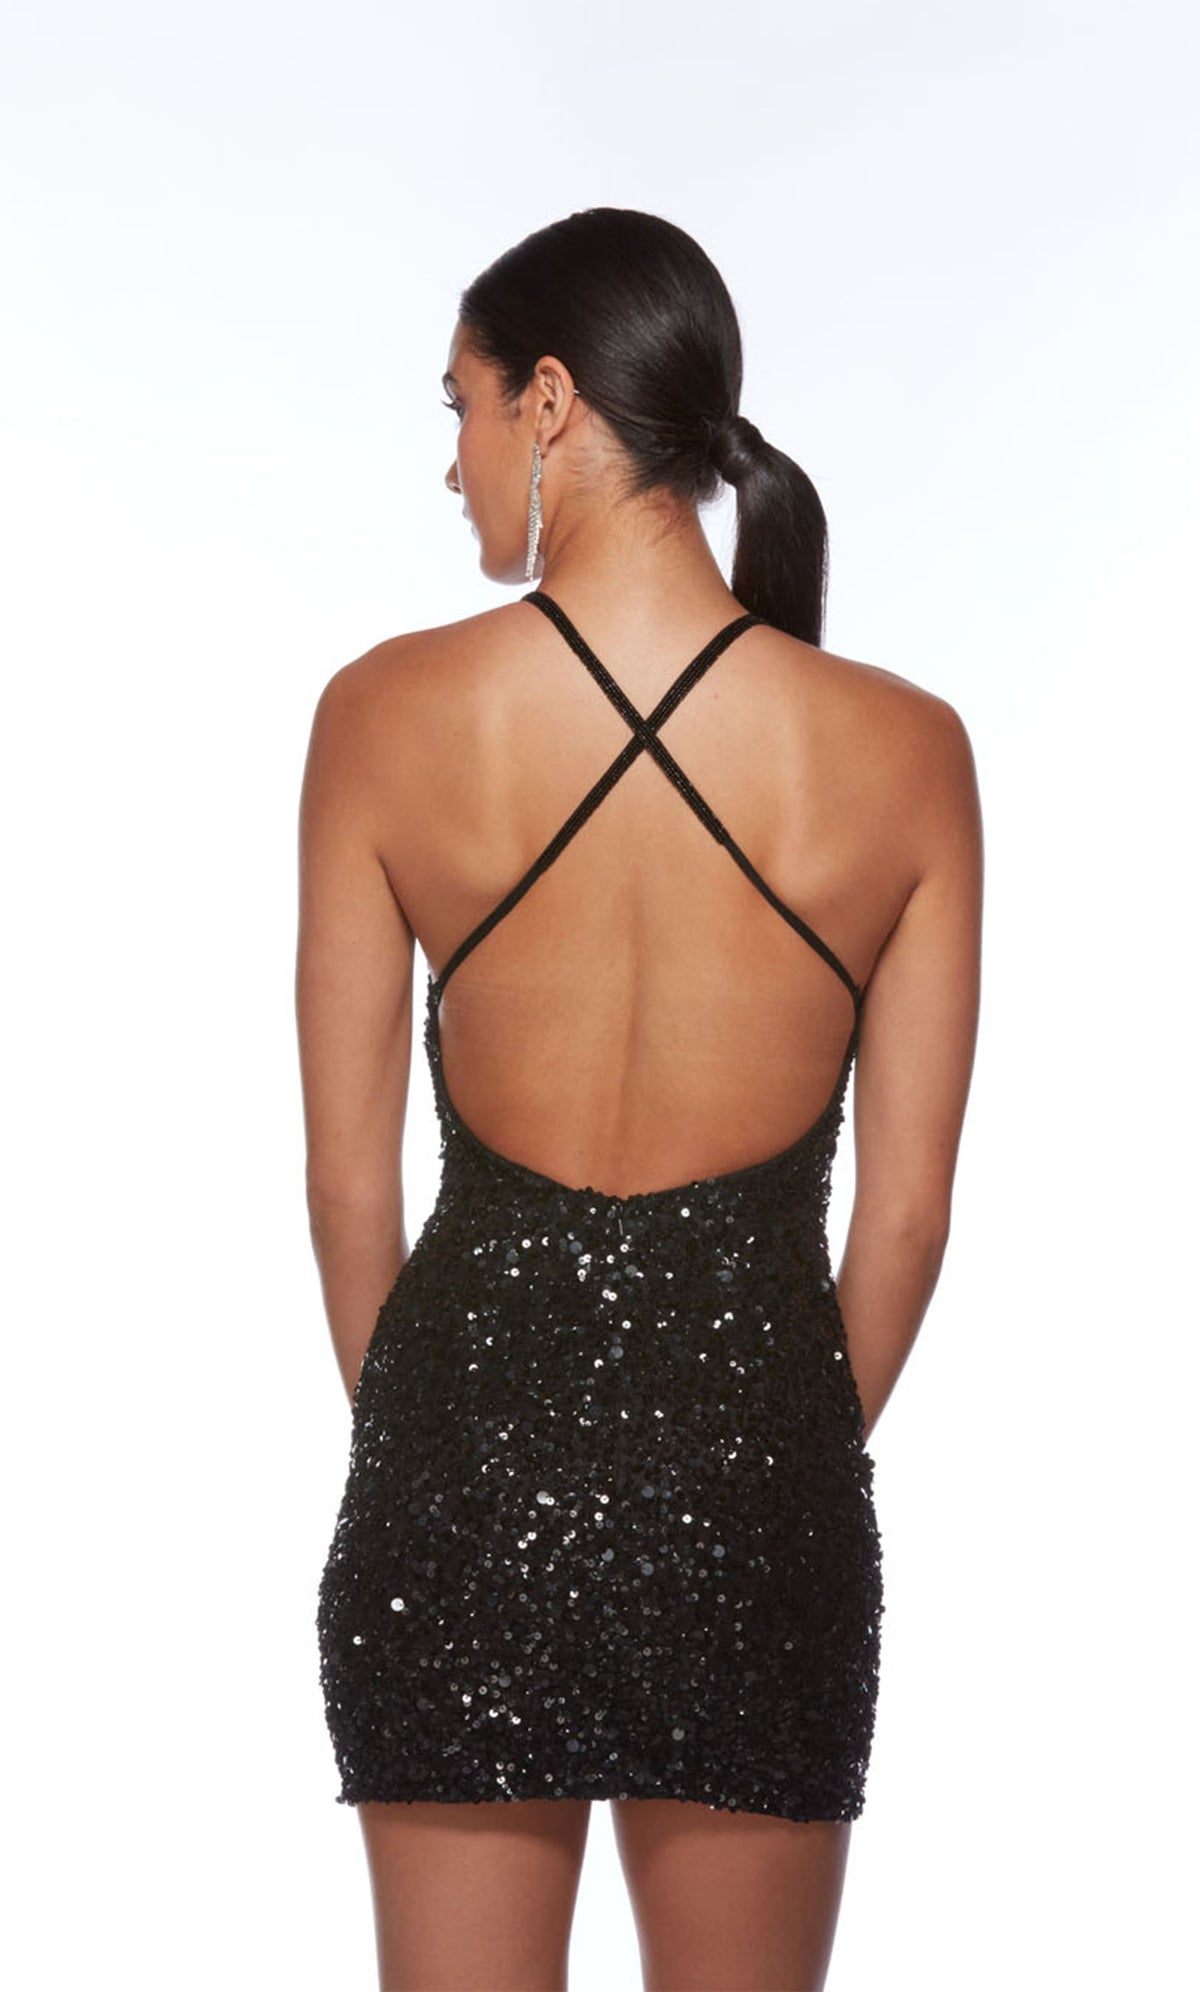 Short lbd with an V neckline, adjustable crisscross back straps, perfect for homecoming or any semi-formal event!